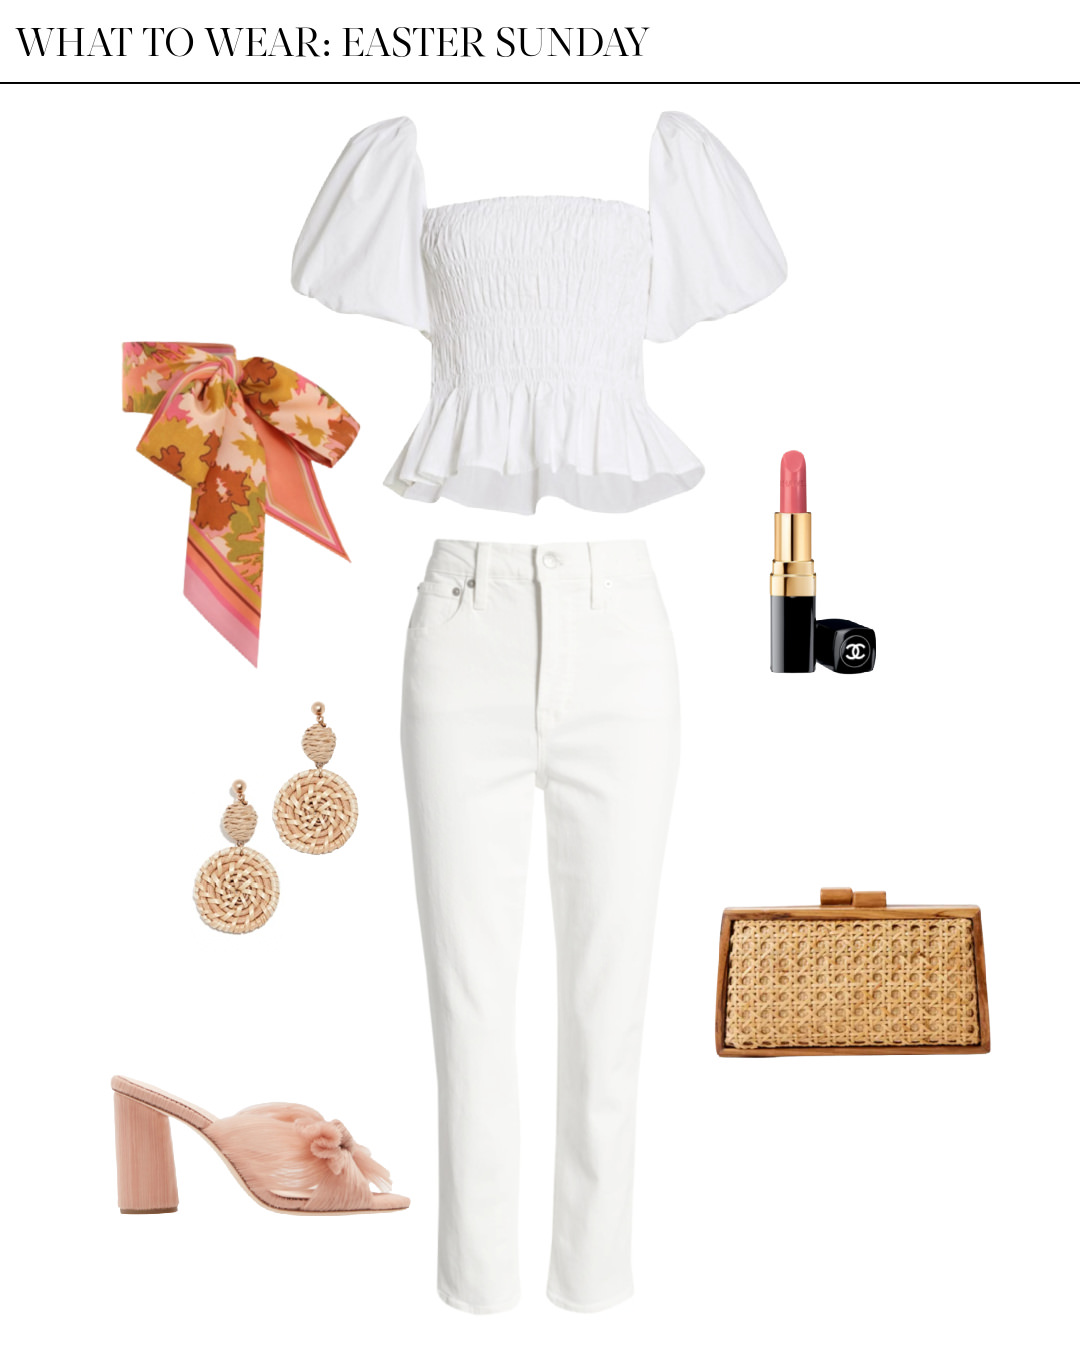 casual easter outfit ideas